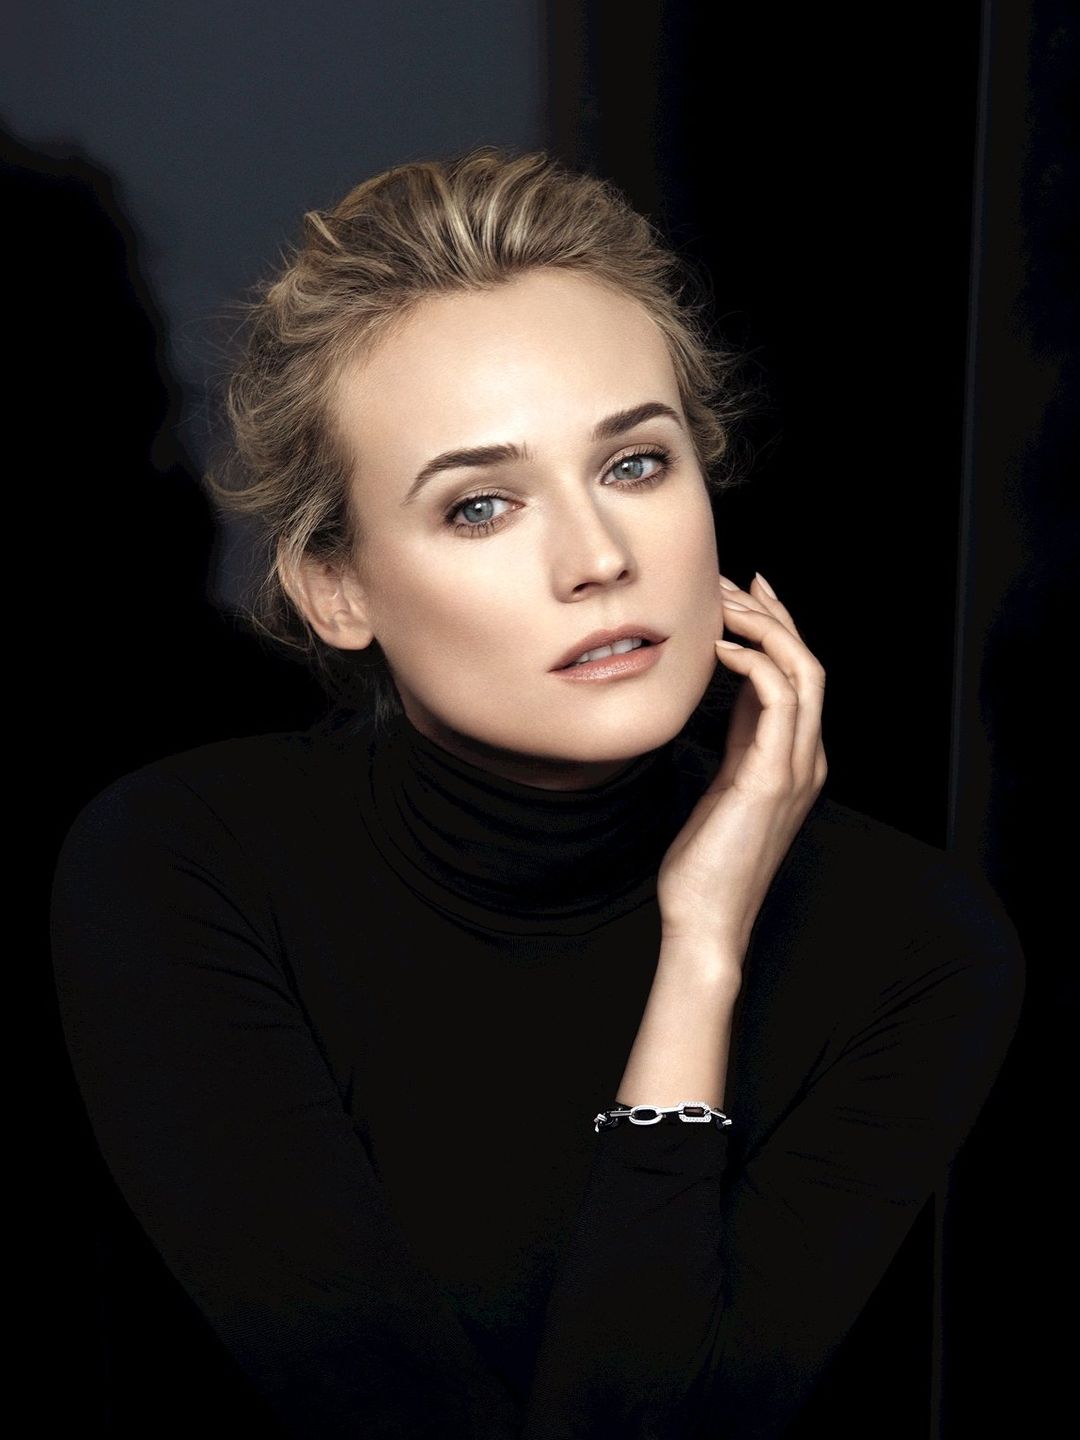 Diane Kruger where did she study